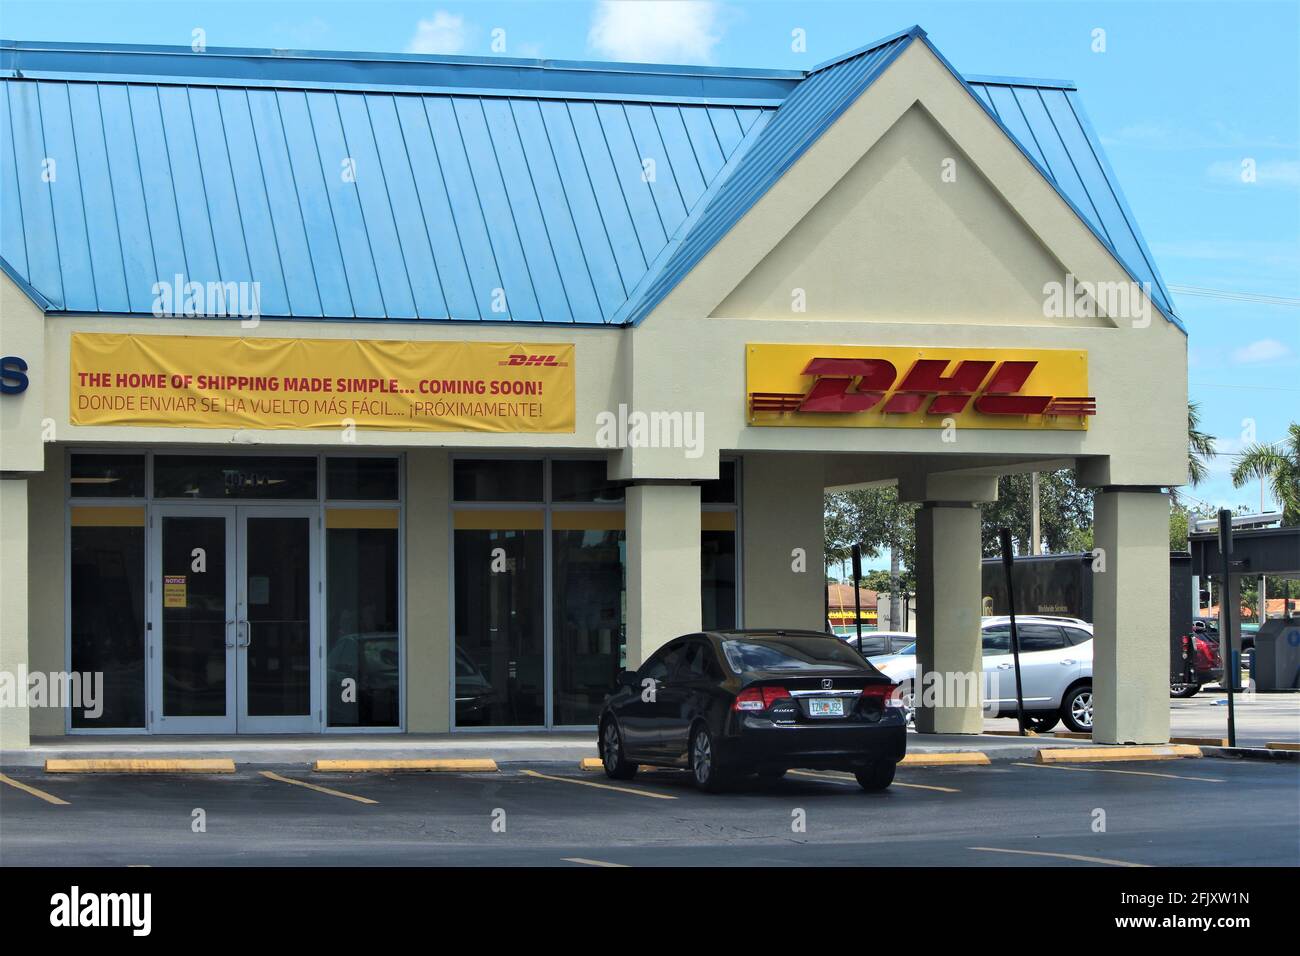 New DHL store opening soon in Hialeah, FL. Still remains closed due to COVID-19, corona virus pandemic. Stock Photo